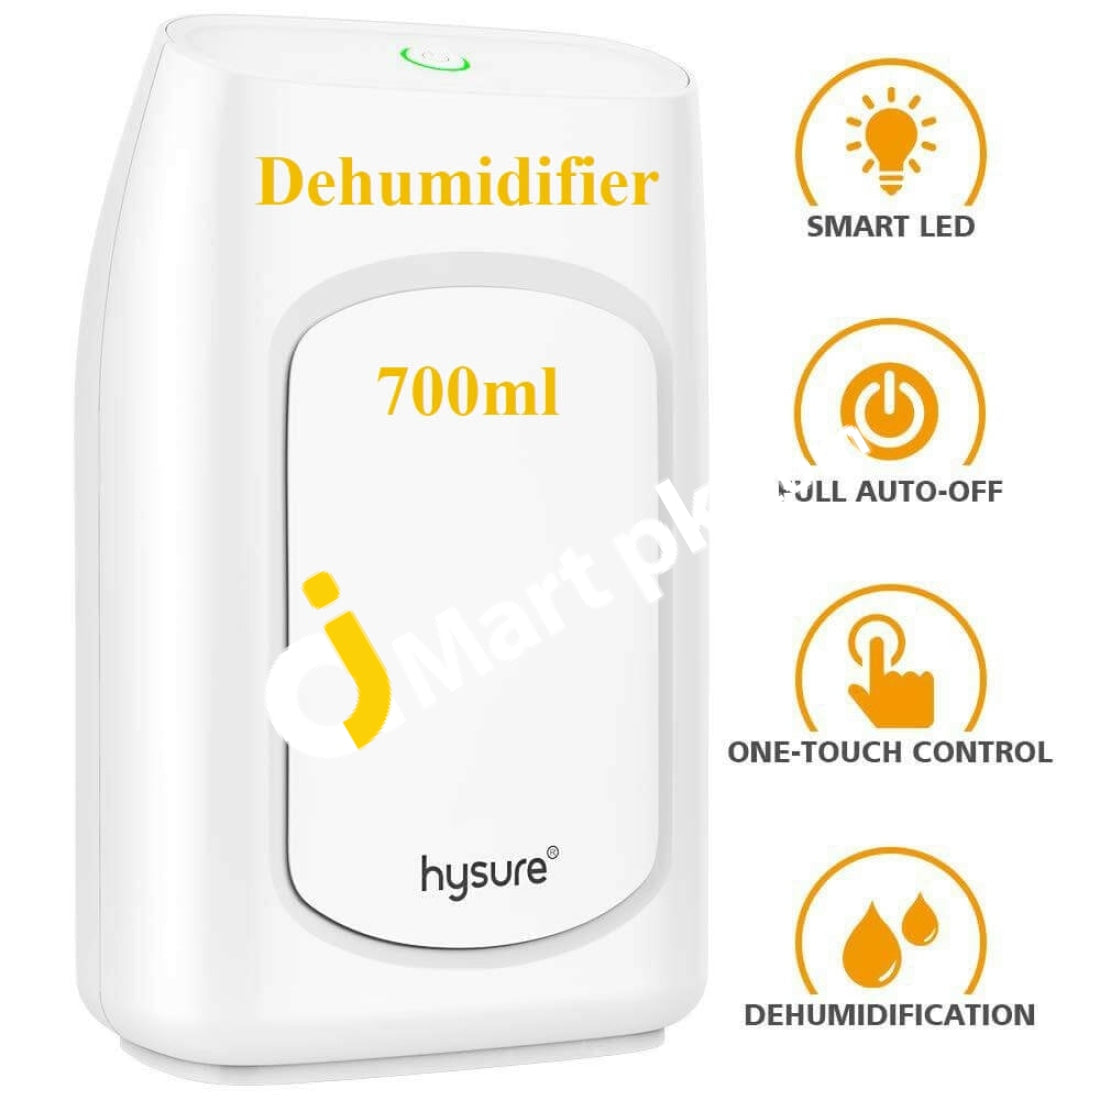 Dehumidifier Hysure 700Ml Compact Portable Ultra Quiet For Removing Damp Mold Moisture - Imported